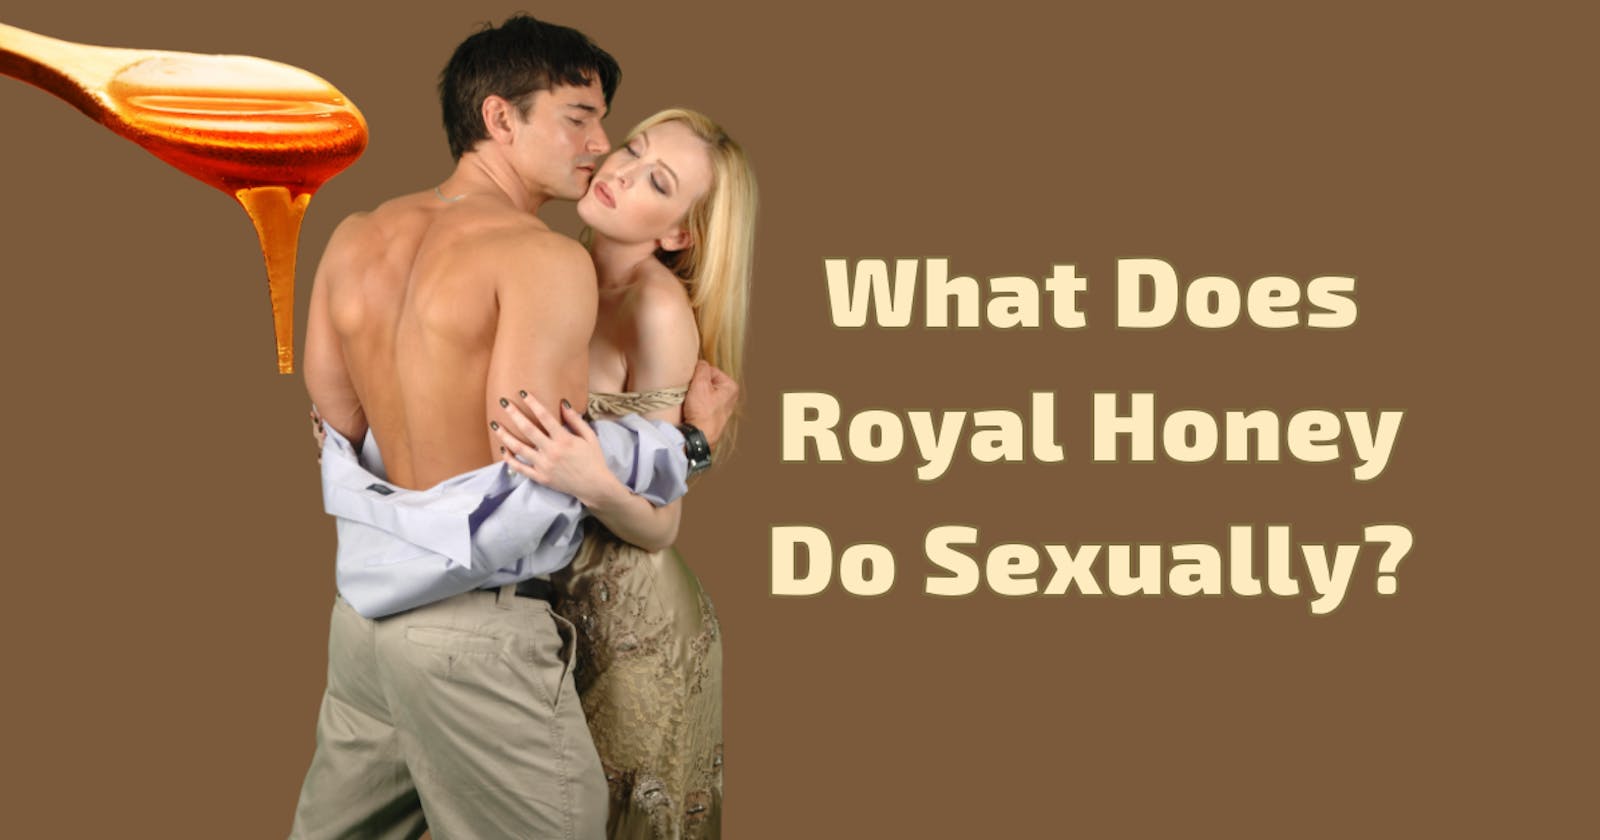 Royal Honey Male Enhancement: Is it Scam Or Real?